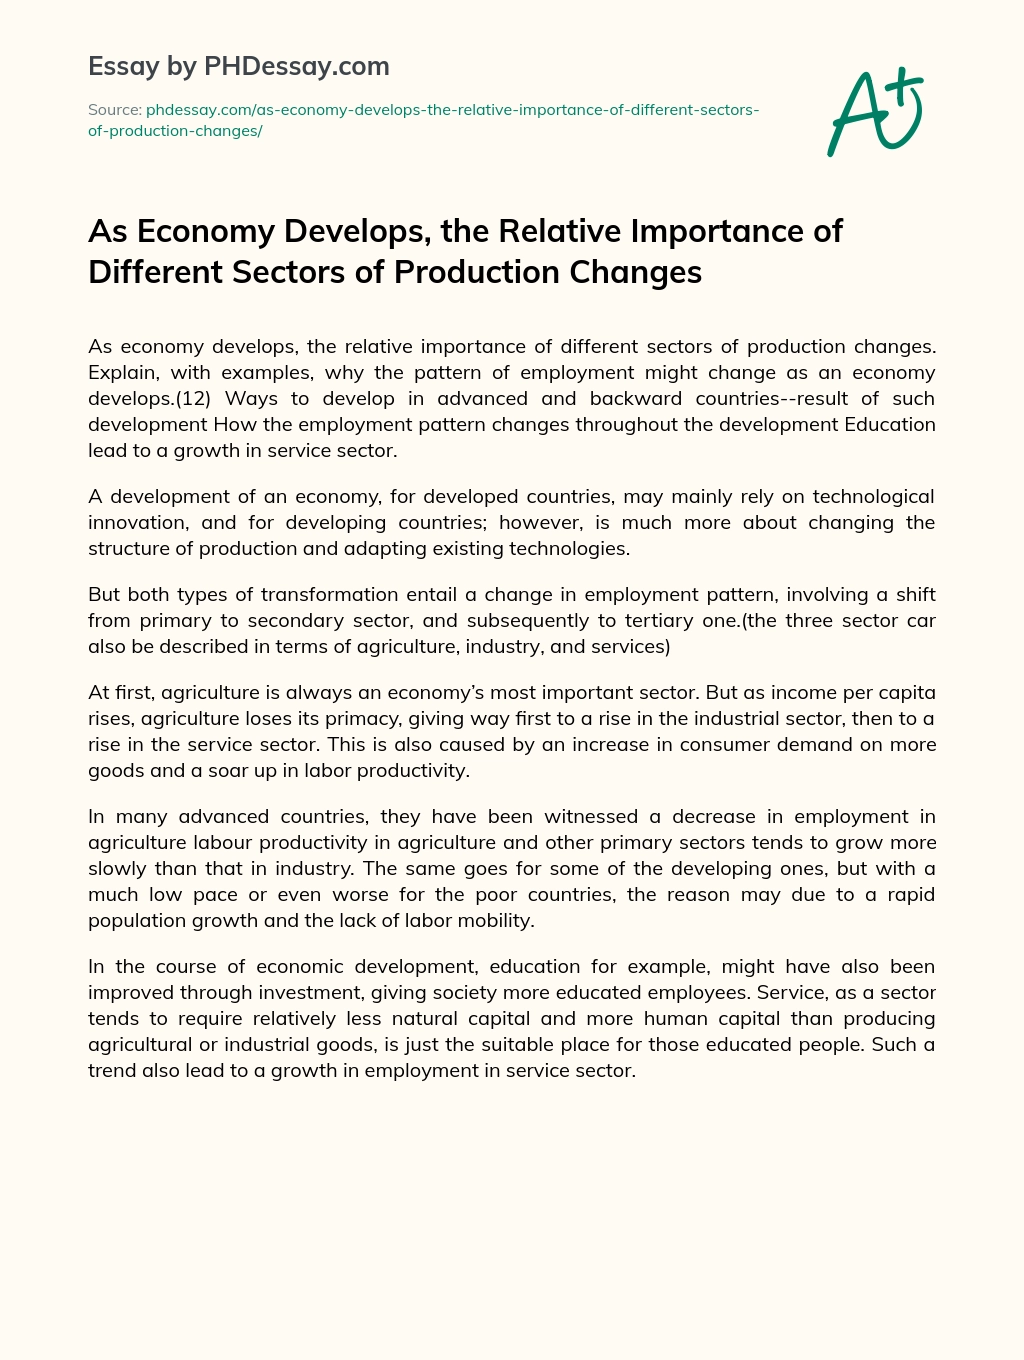 As Economy Develops, the Relative Importance of Different Sectors of Production Changes essay